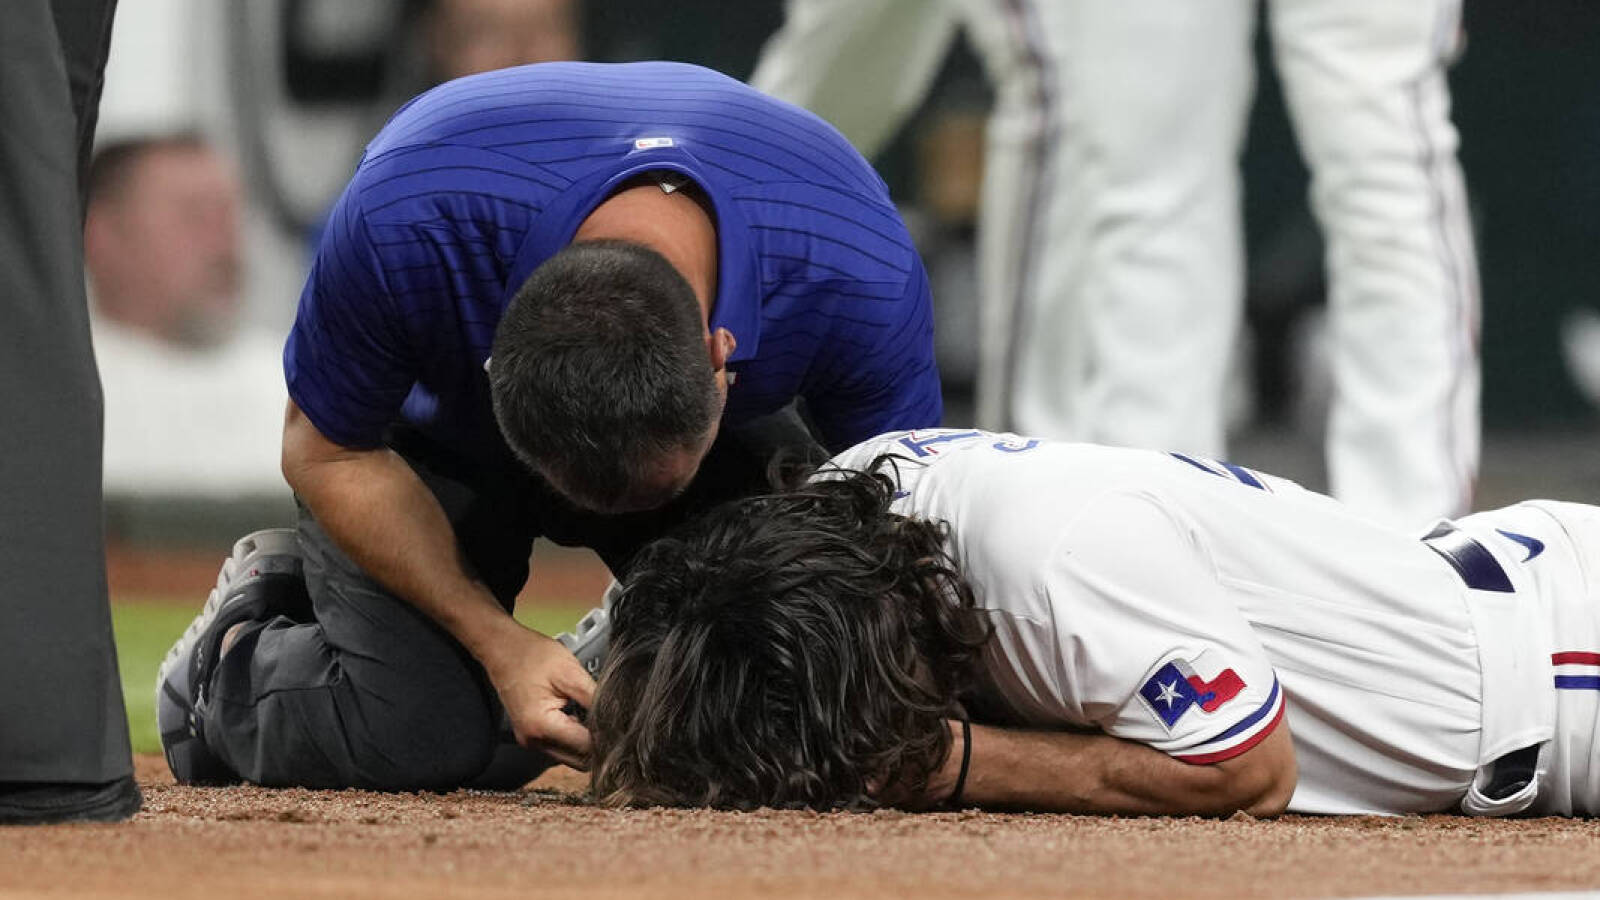 Rangers OF reveals extent of injuries after being hit in face with pitch